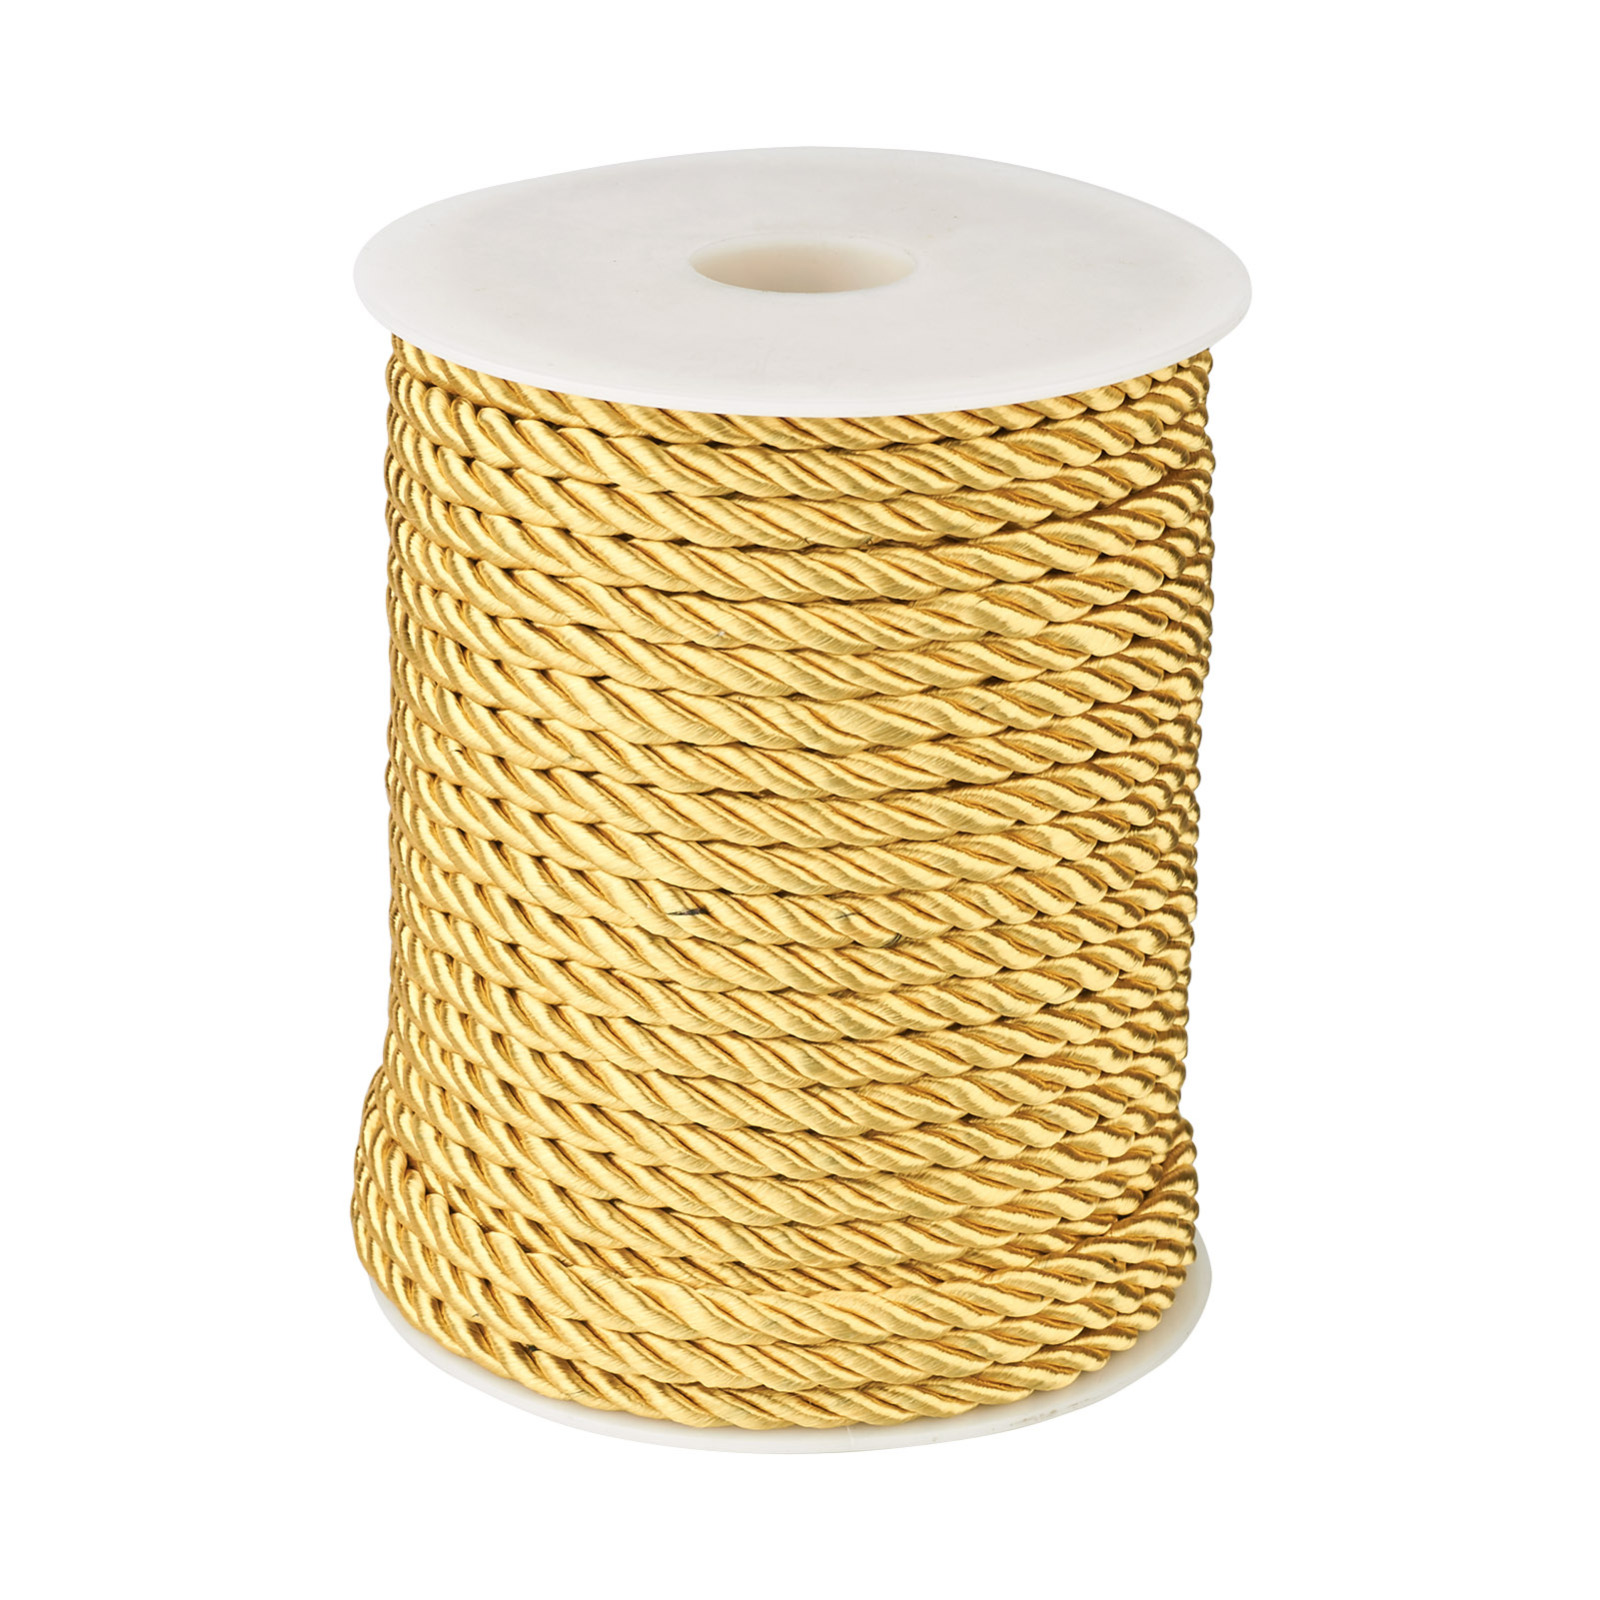 3 ply Polyester Cords Binding Rope Decorative Rope Hand Cord